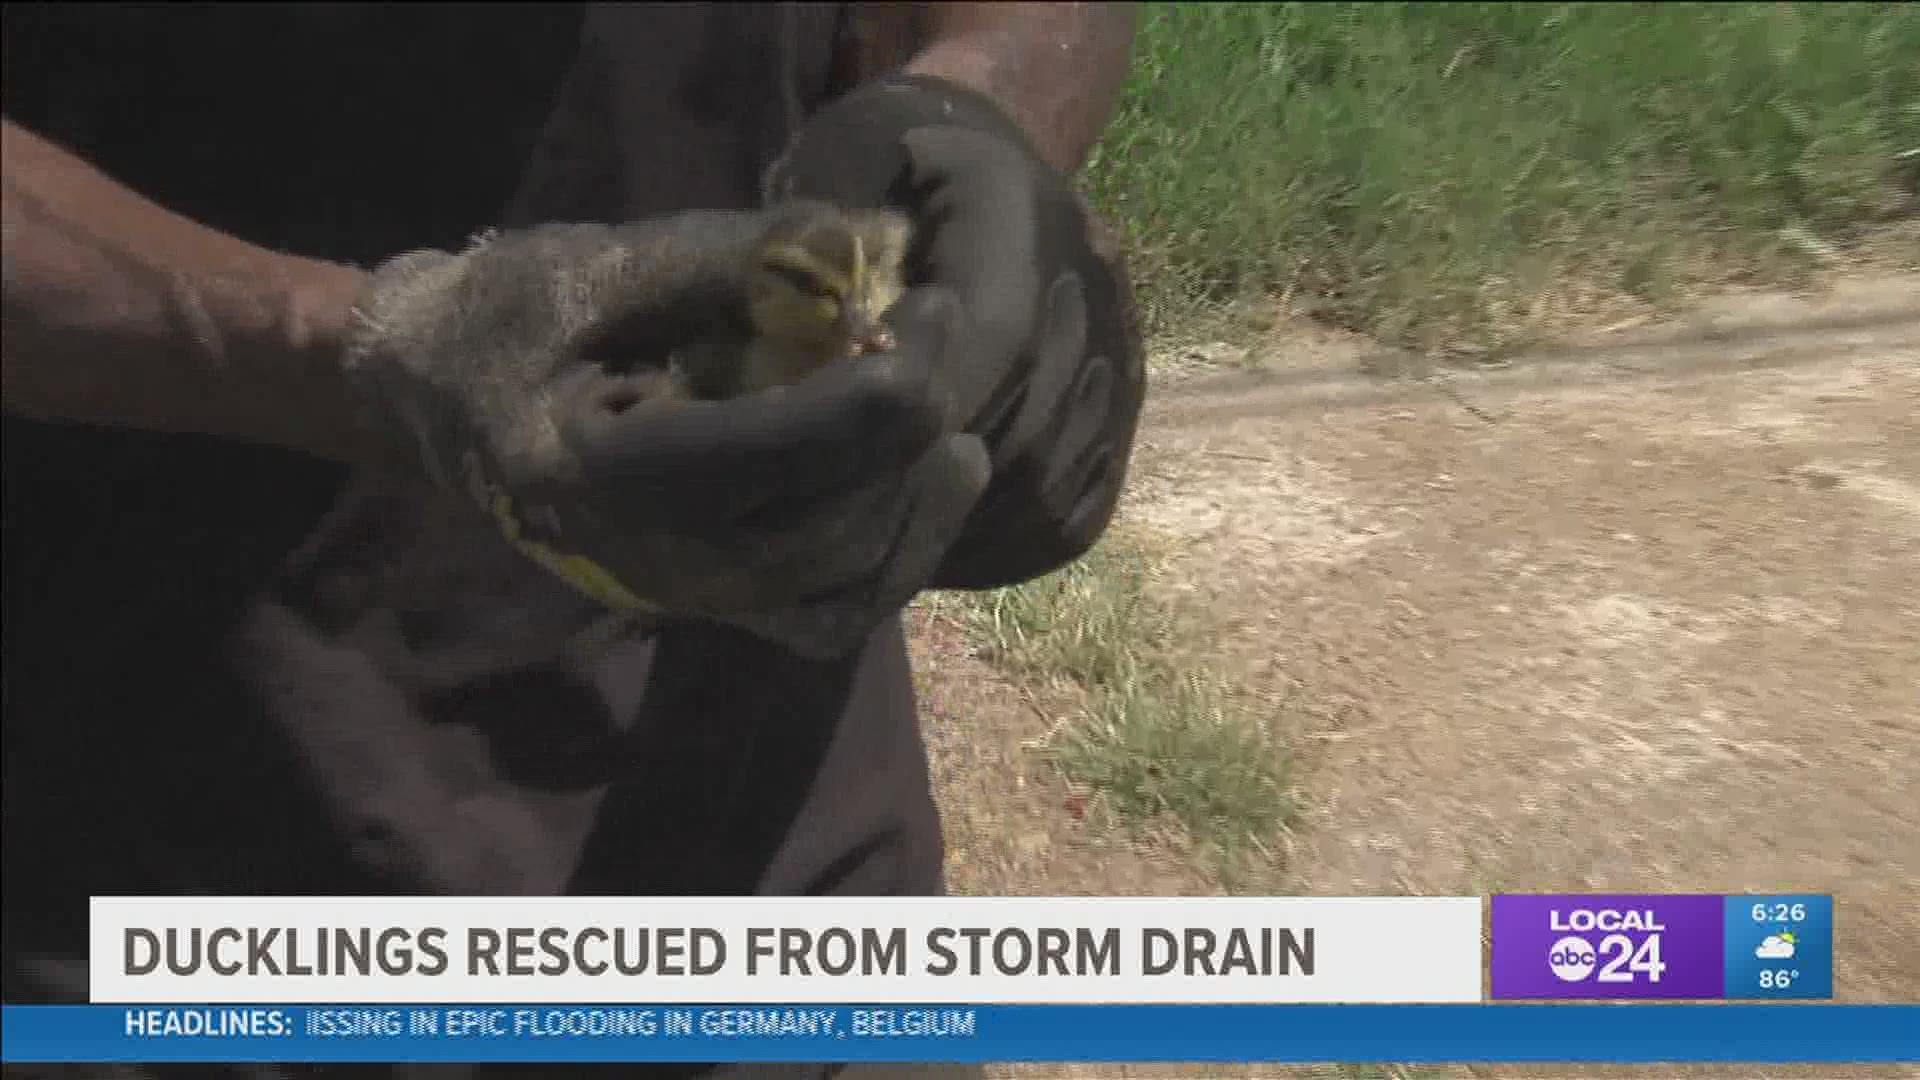 John Cannon called Memphis police before noon Thursday after finding the ducklings stuck in a drain on Georgia between Lauderdale and Orleans.